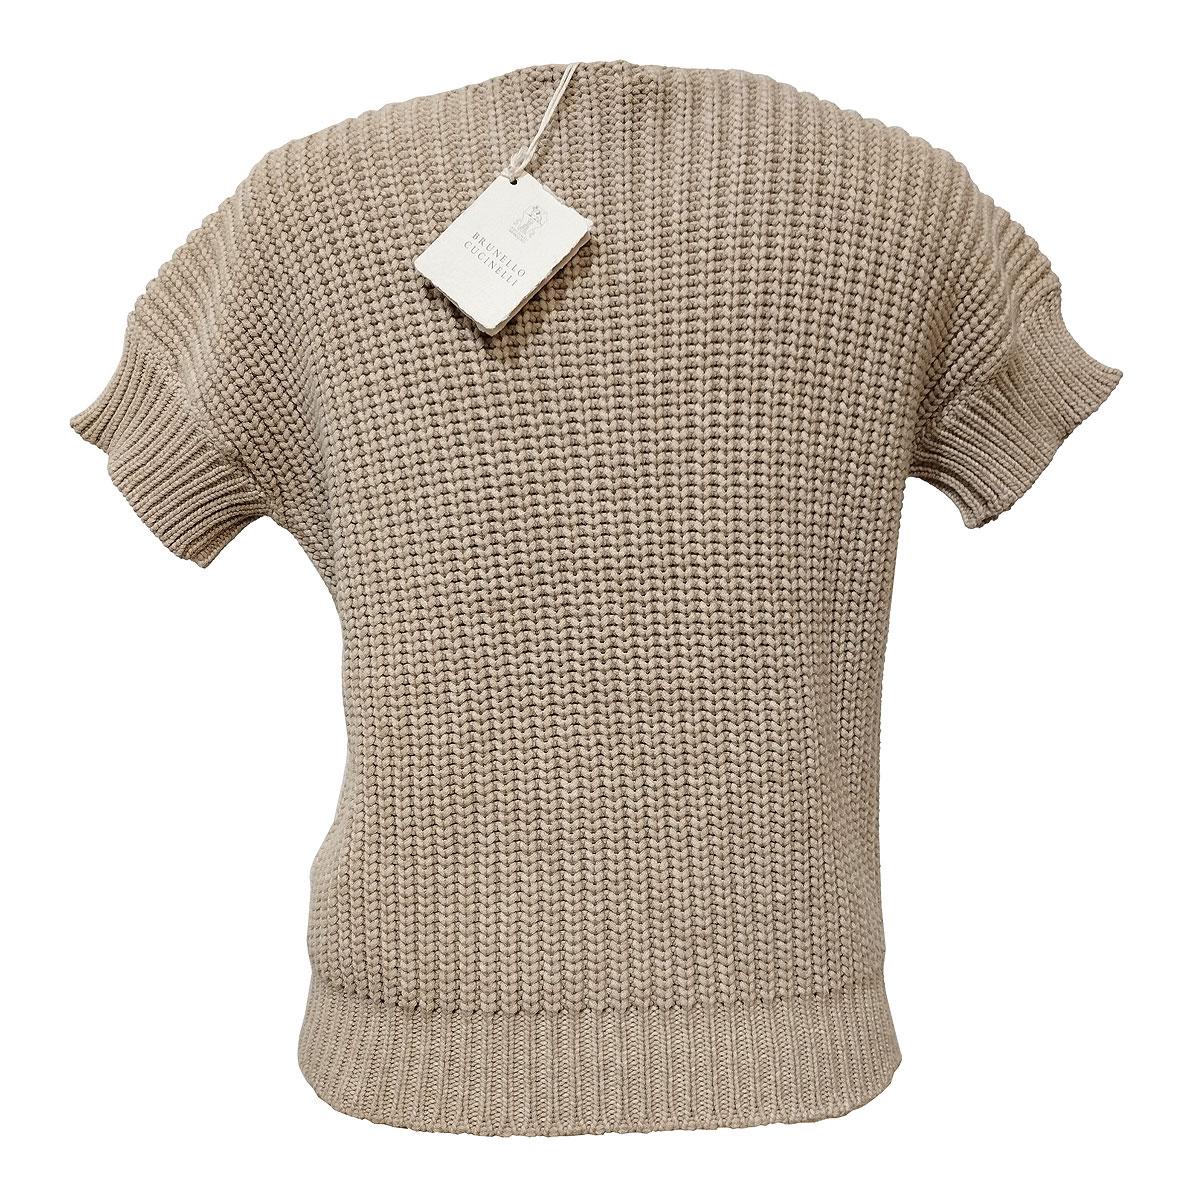 Beautiful and understated luxury set by Brunello Cucinelli
Brand new with tags
Sweater + Top
Cotton (76%) and nylon
Silk top
Natural color
Short sleeve
Shoulder/hem cm 46 (18,11 inches)
Free fast shipping from  Italy
